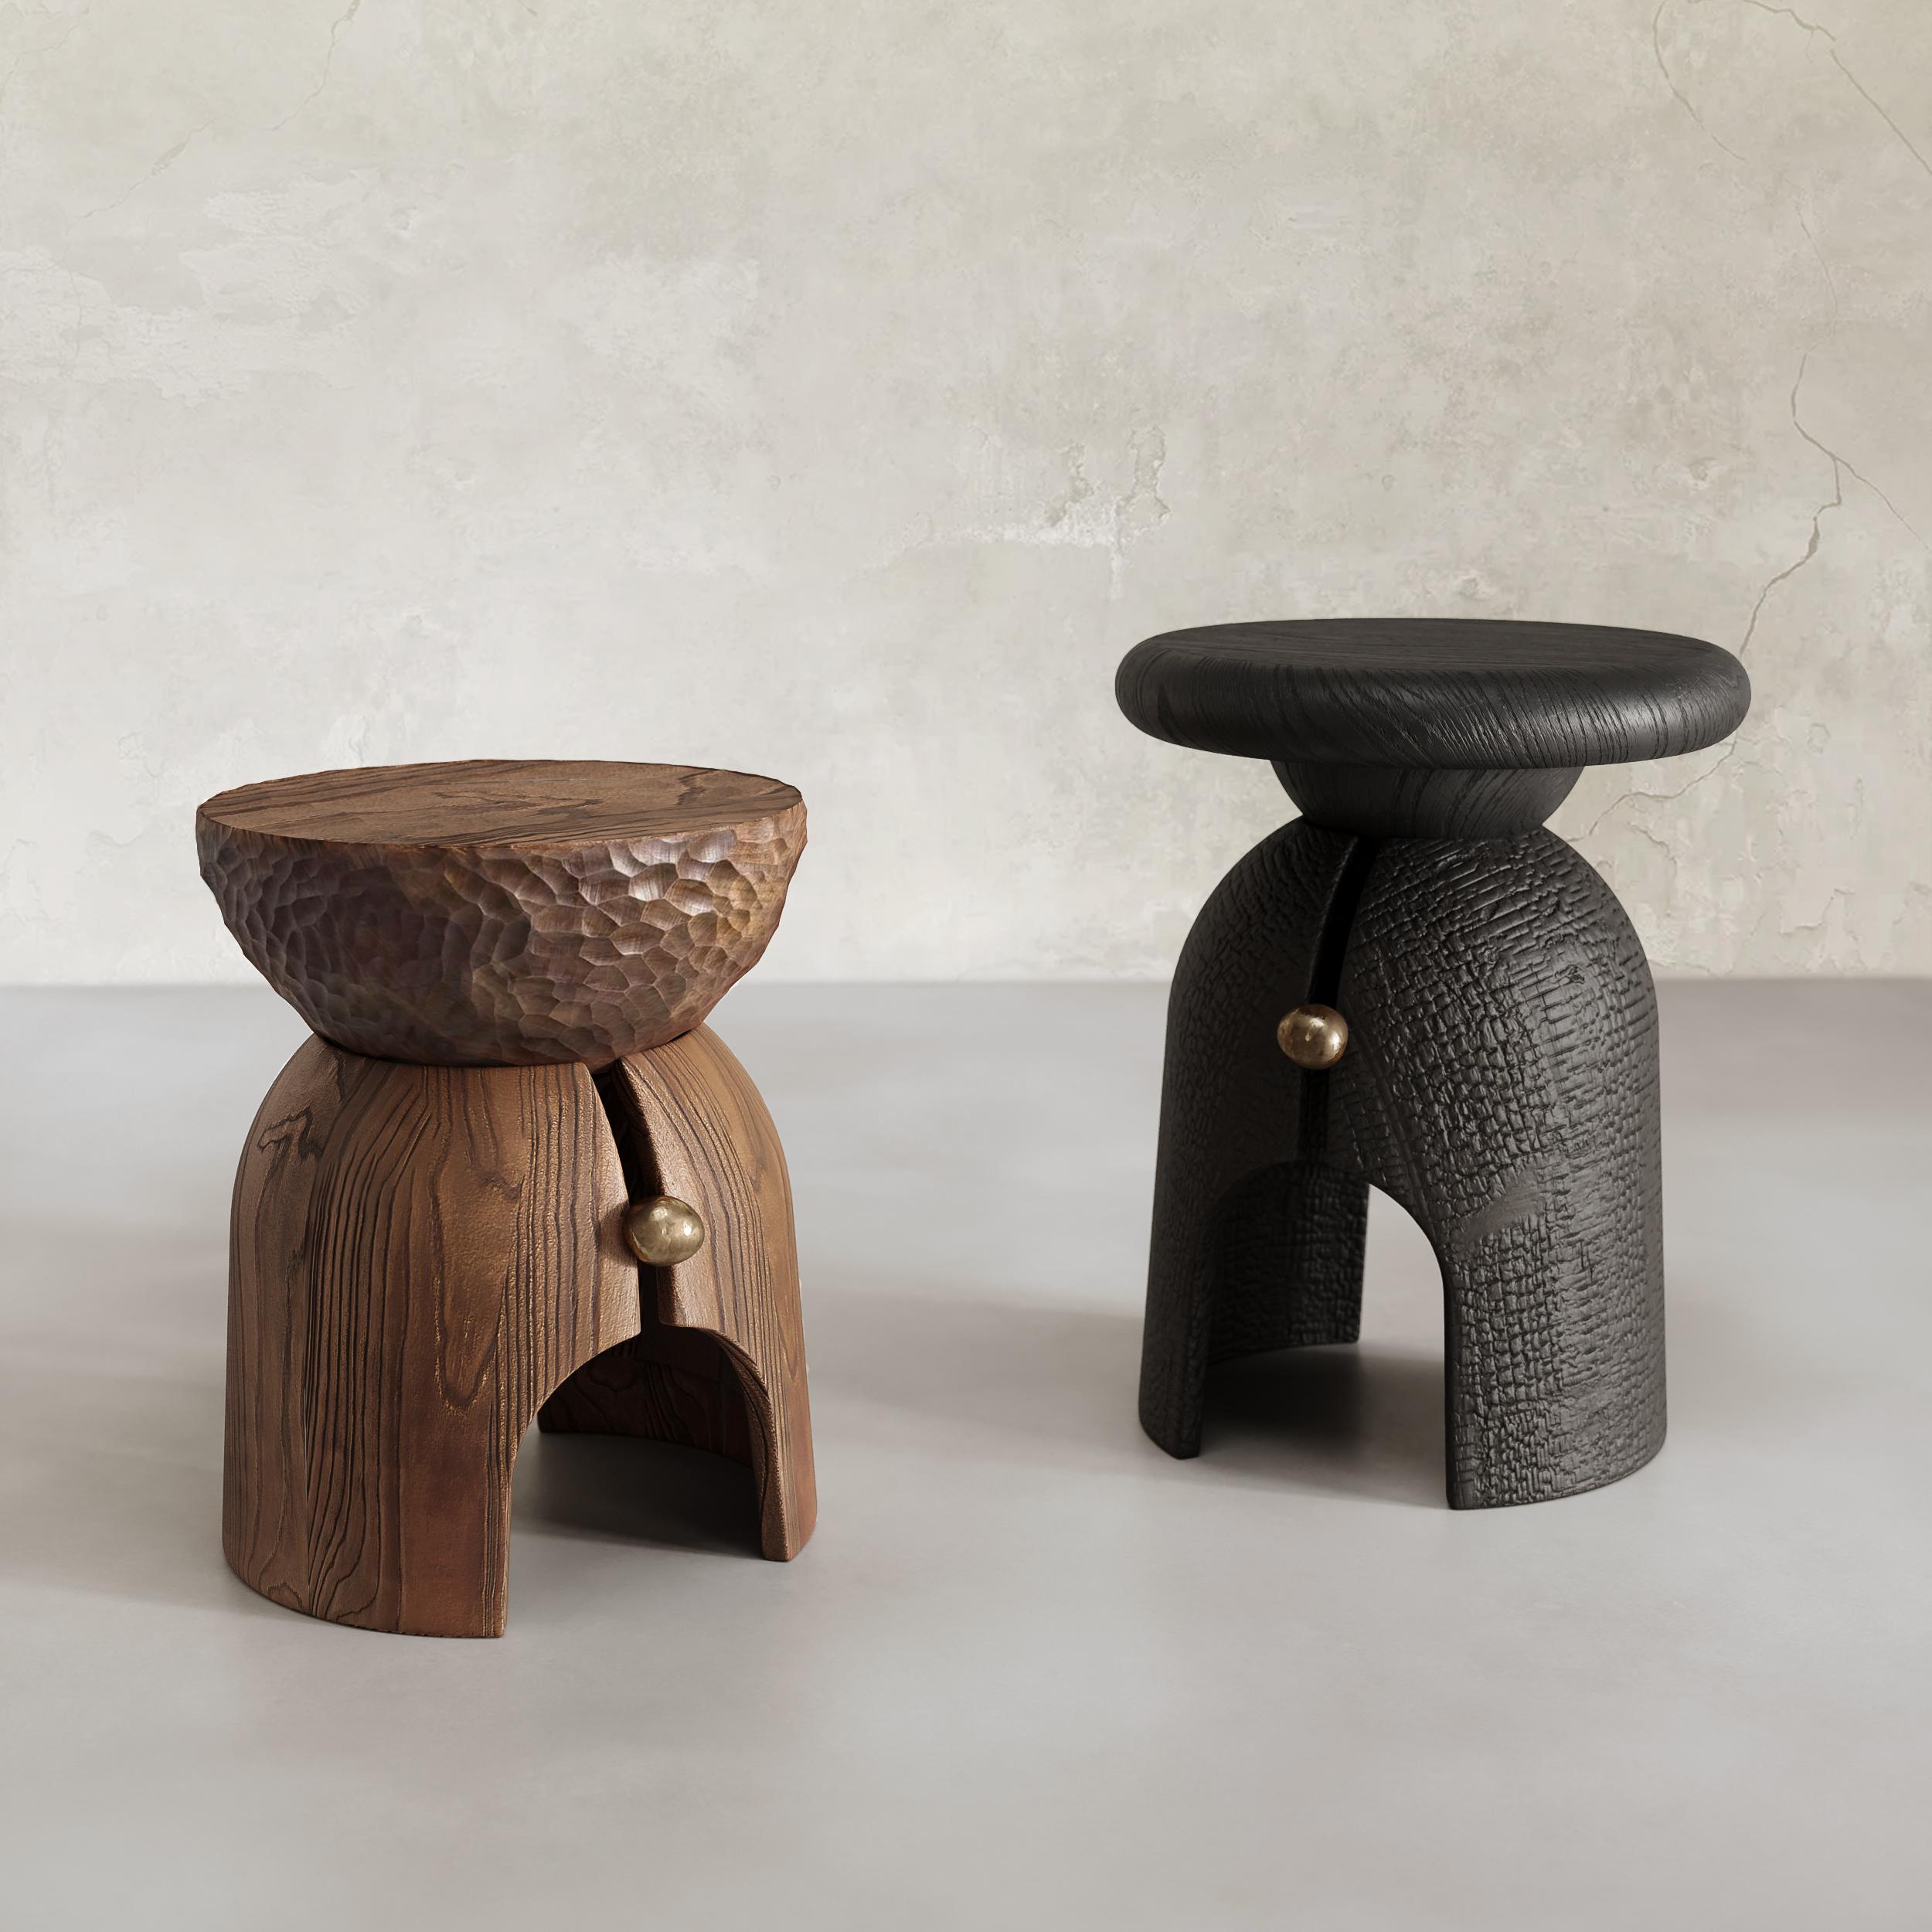 The Venus Side Table is a unique piece of furniture handcrafted using a traditional Japanese technique called Shou Sugi Ban, which involves charring the wood to create a textural surface. The table combines solid wood and liquid bronze, ensuring